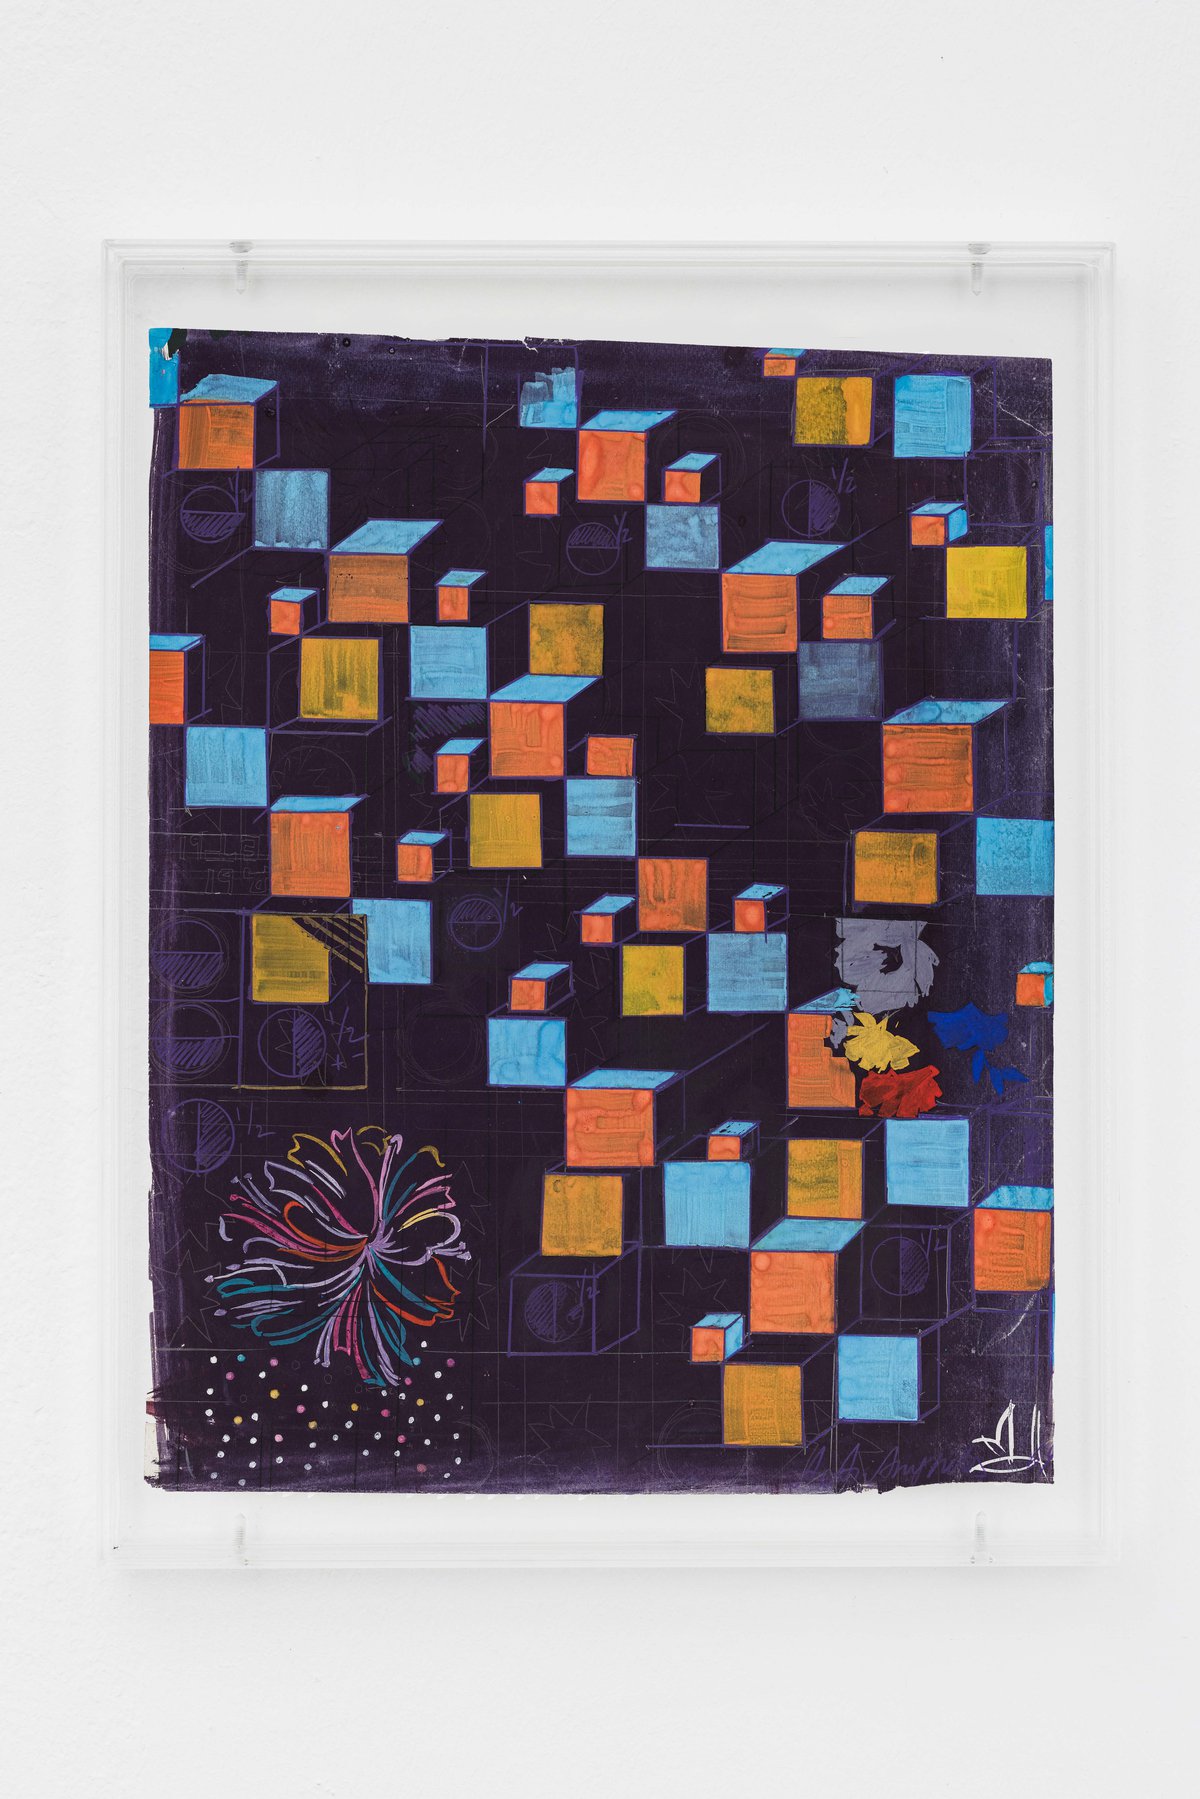 Anna AndreevaLittle Cubes (Stars &amp; Planets), 1969Ink, gouache and pencil on paper53 x 42 cm56 x 45 cm (framed)